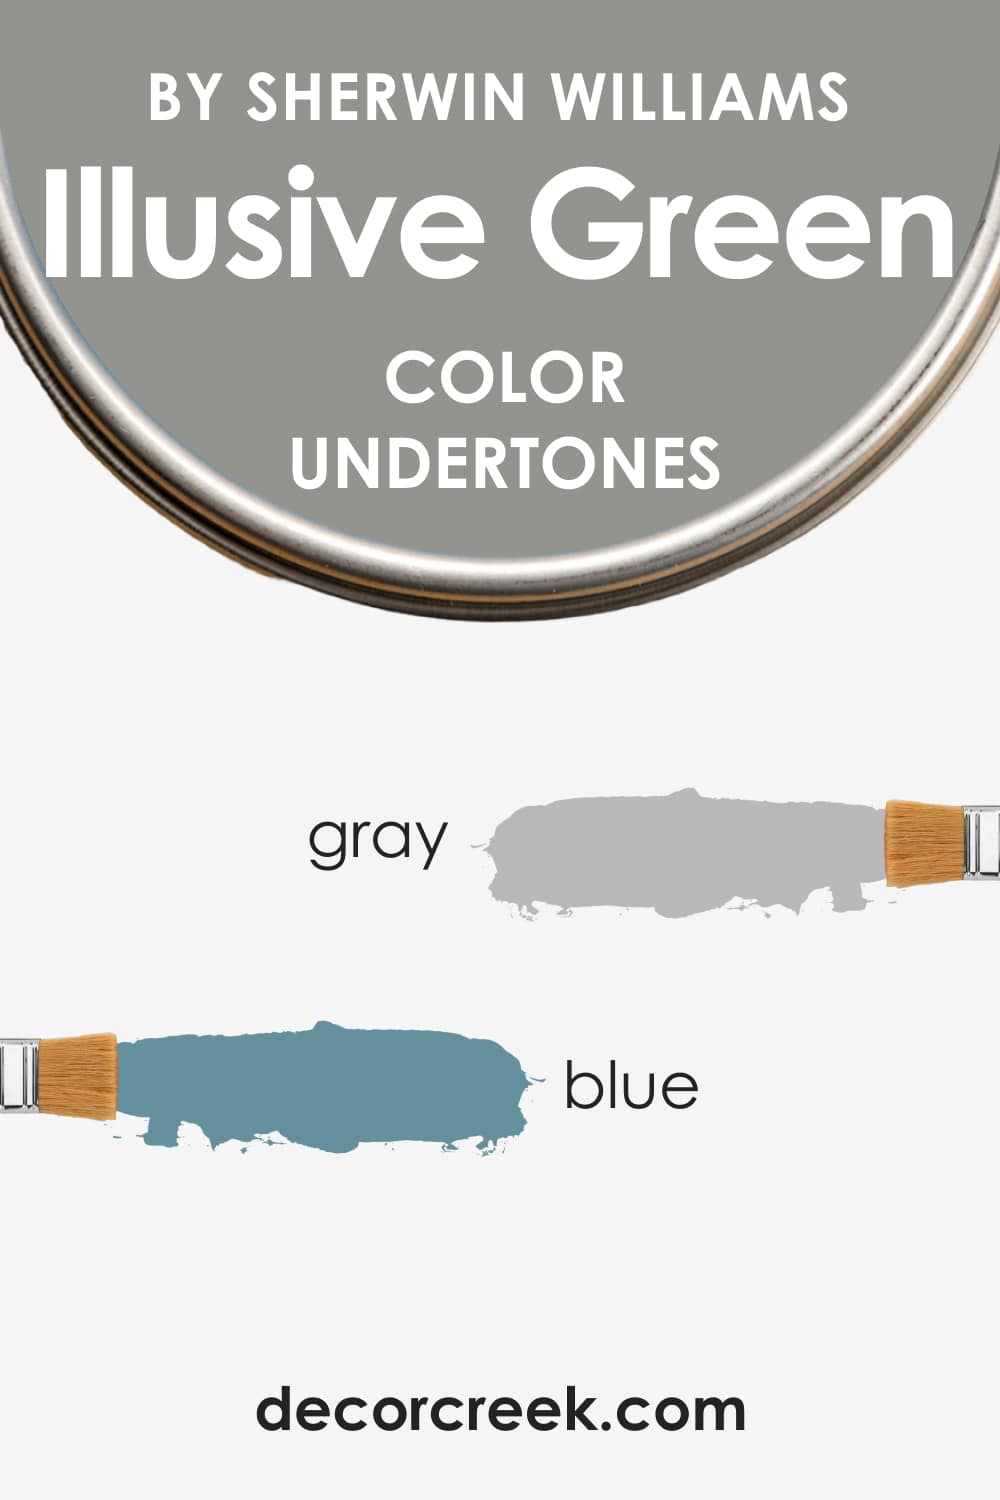 What Undertones Does Illusive Green SW-9164 Have?